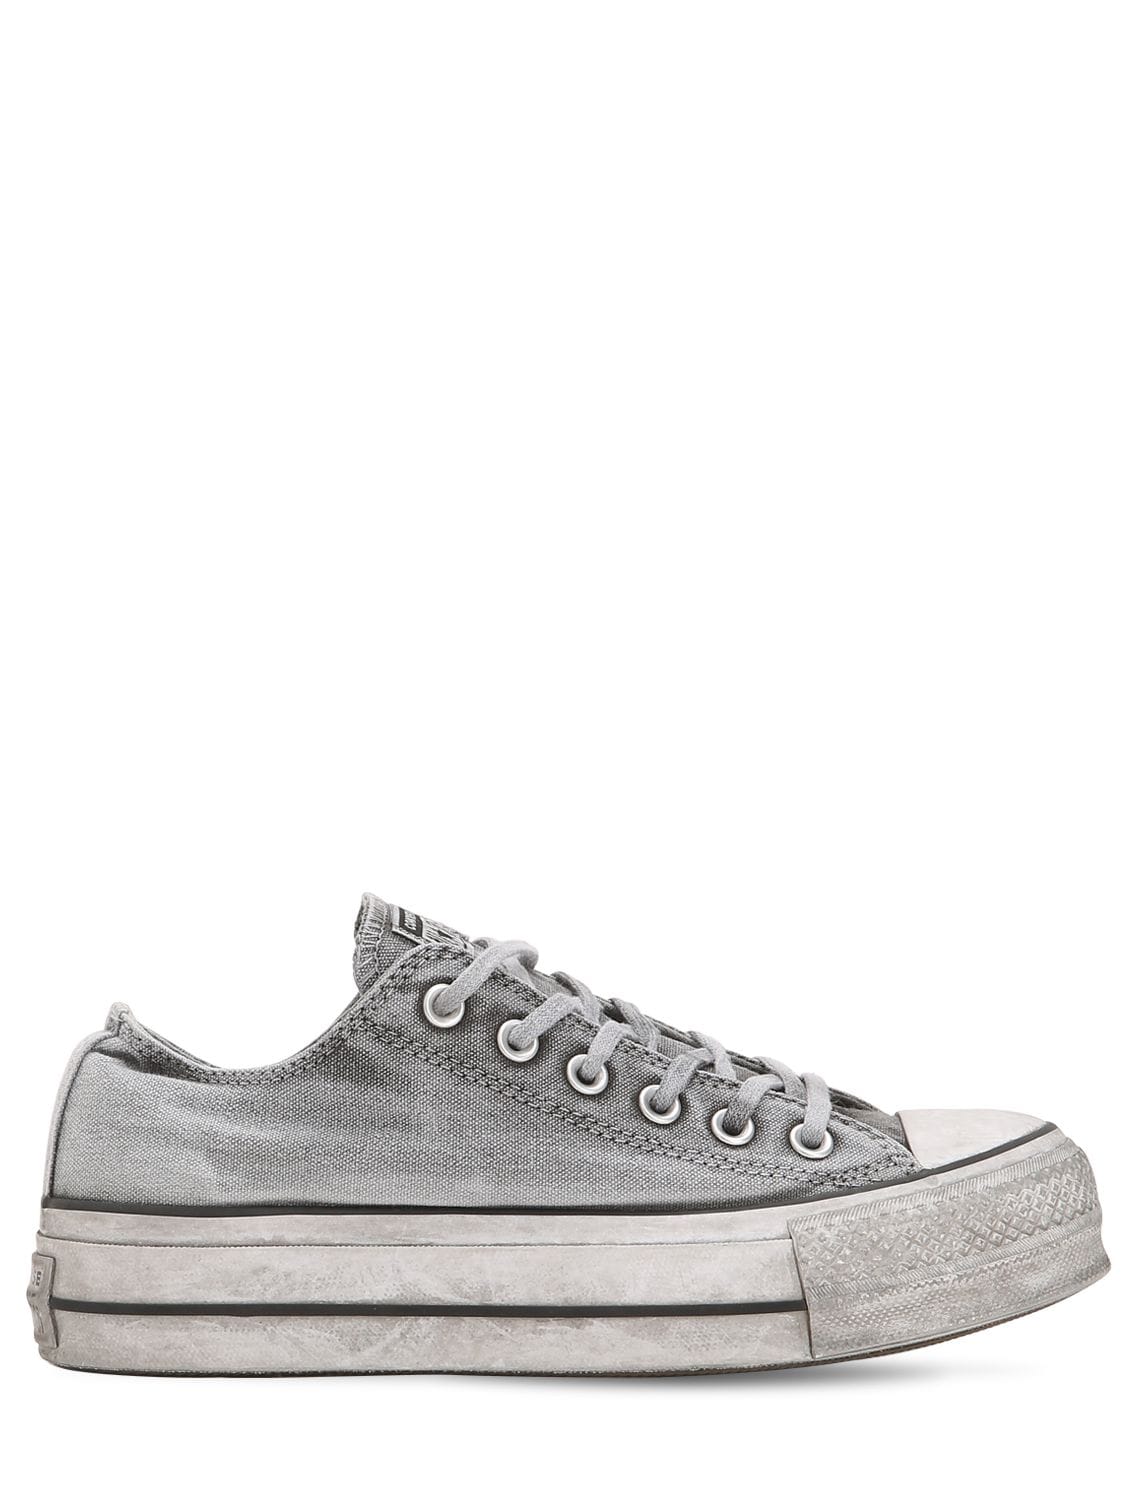 Converse Chuck Taylor Ox Lift Canvas Sneakers In Grey